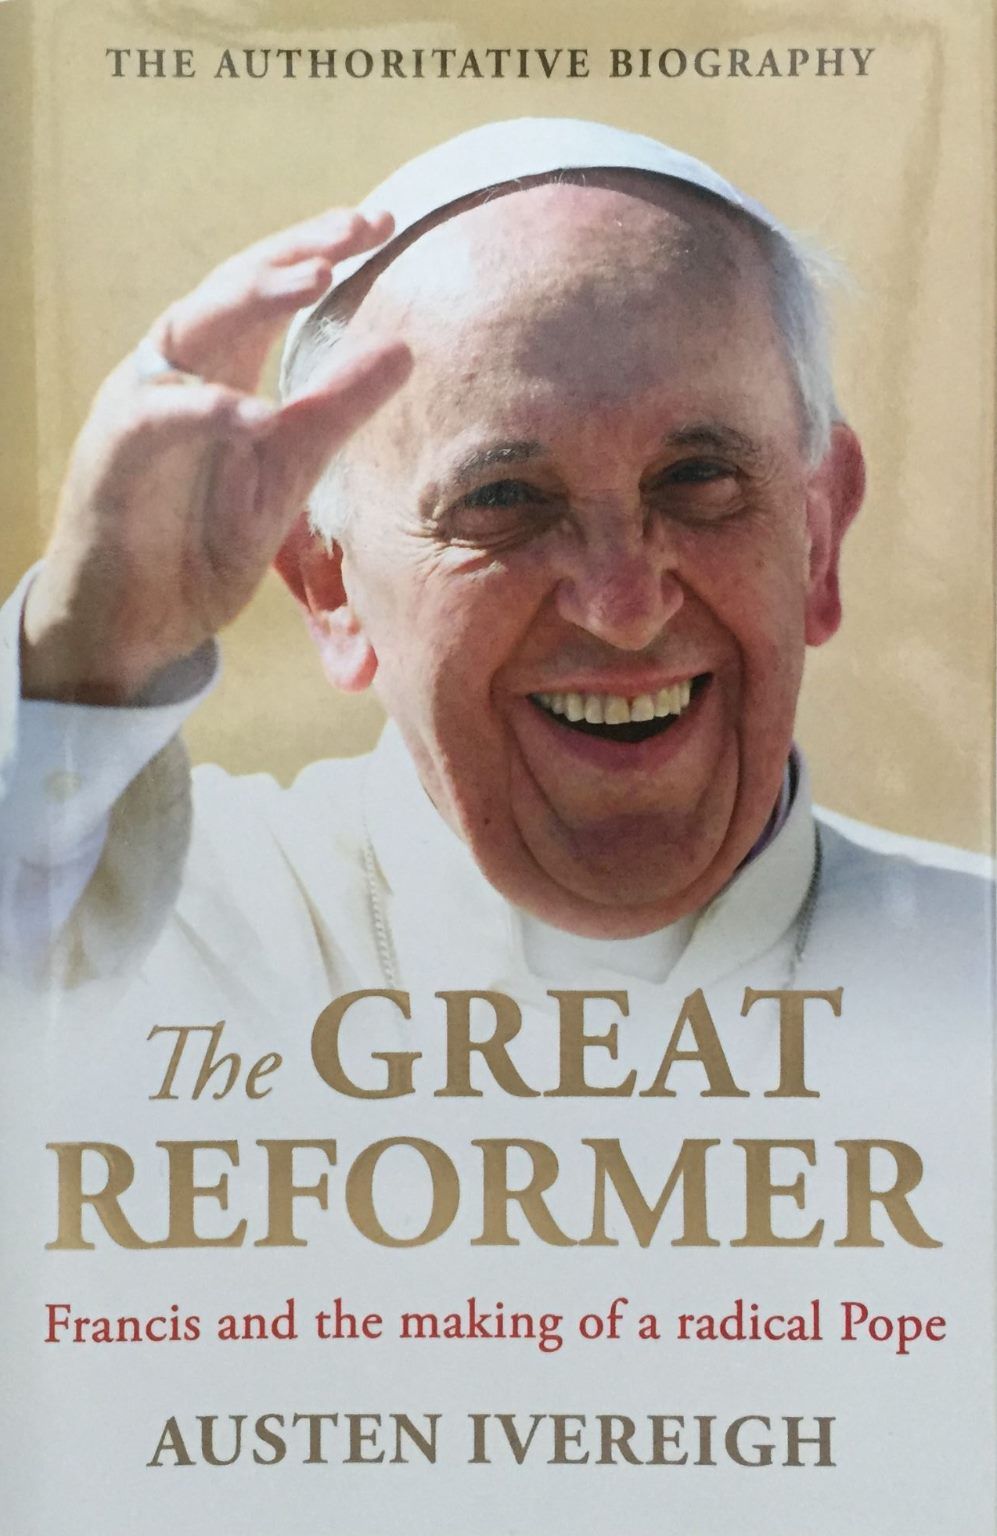 THE GREAT REFORMER: Francis and The Making of A Radical Pope